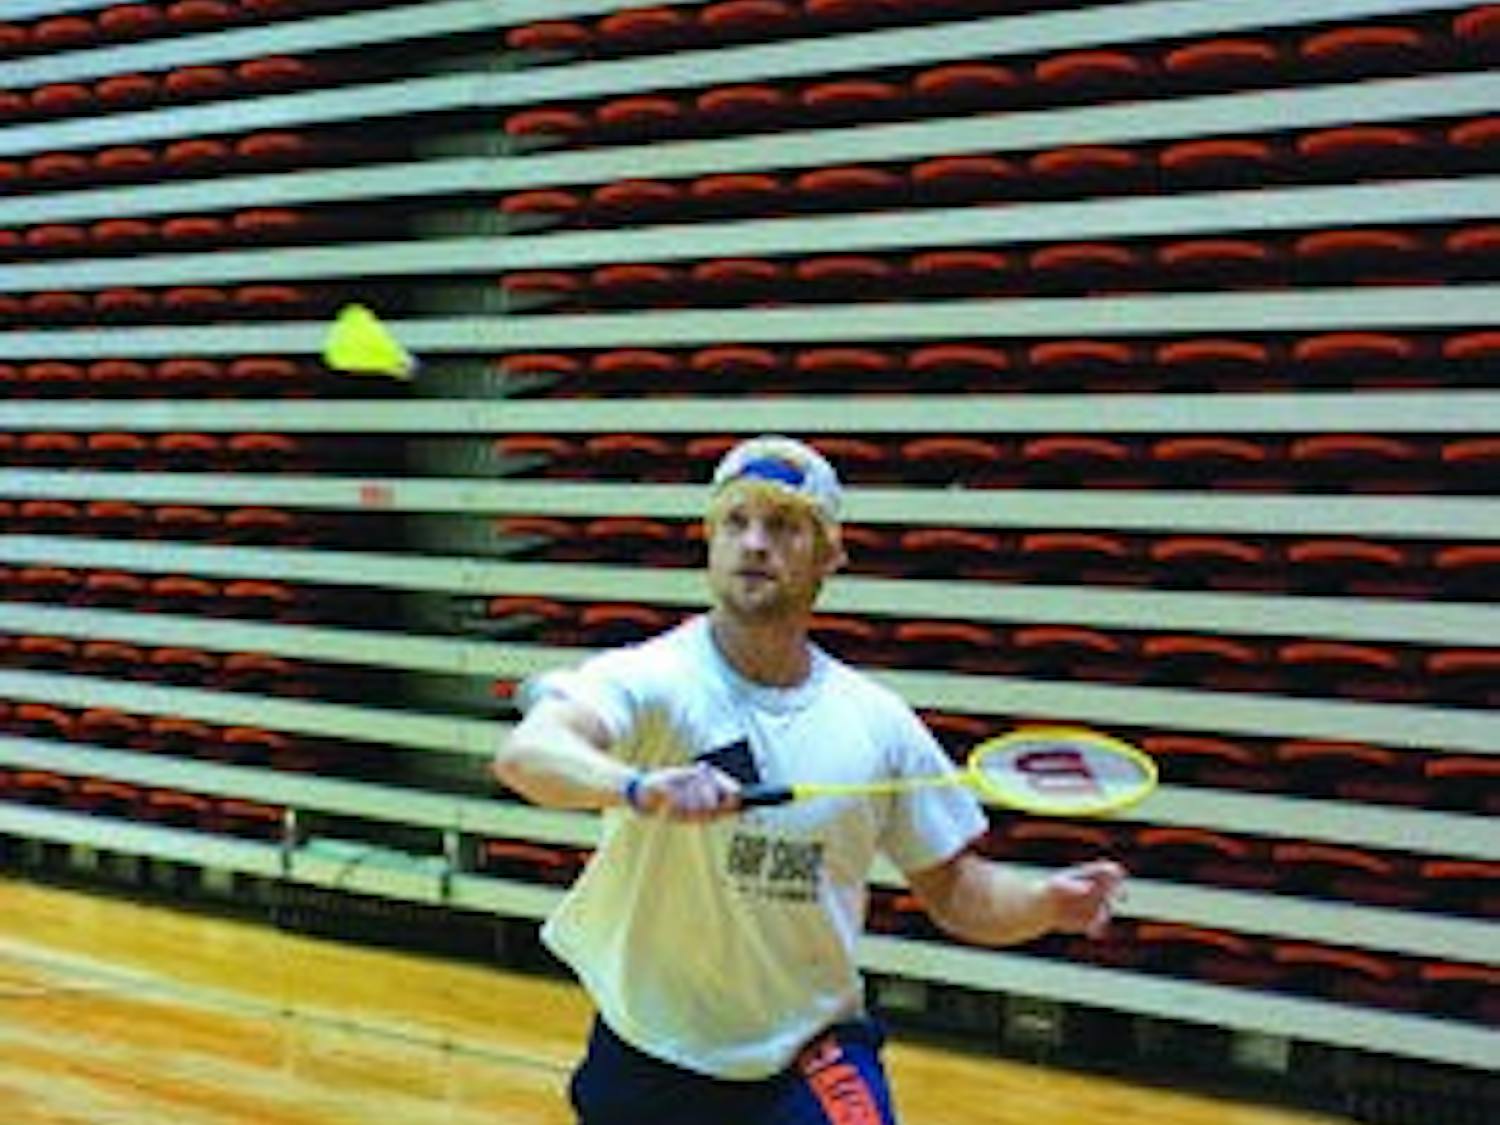 Clint Jarvis, junior in business administration, sends the birdie over the net during the badminton club team practice Tuesday in the Student Act. (Philip Smith/ Photo Staff )